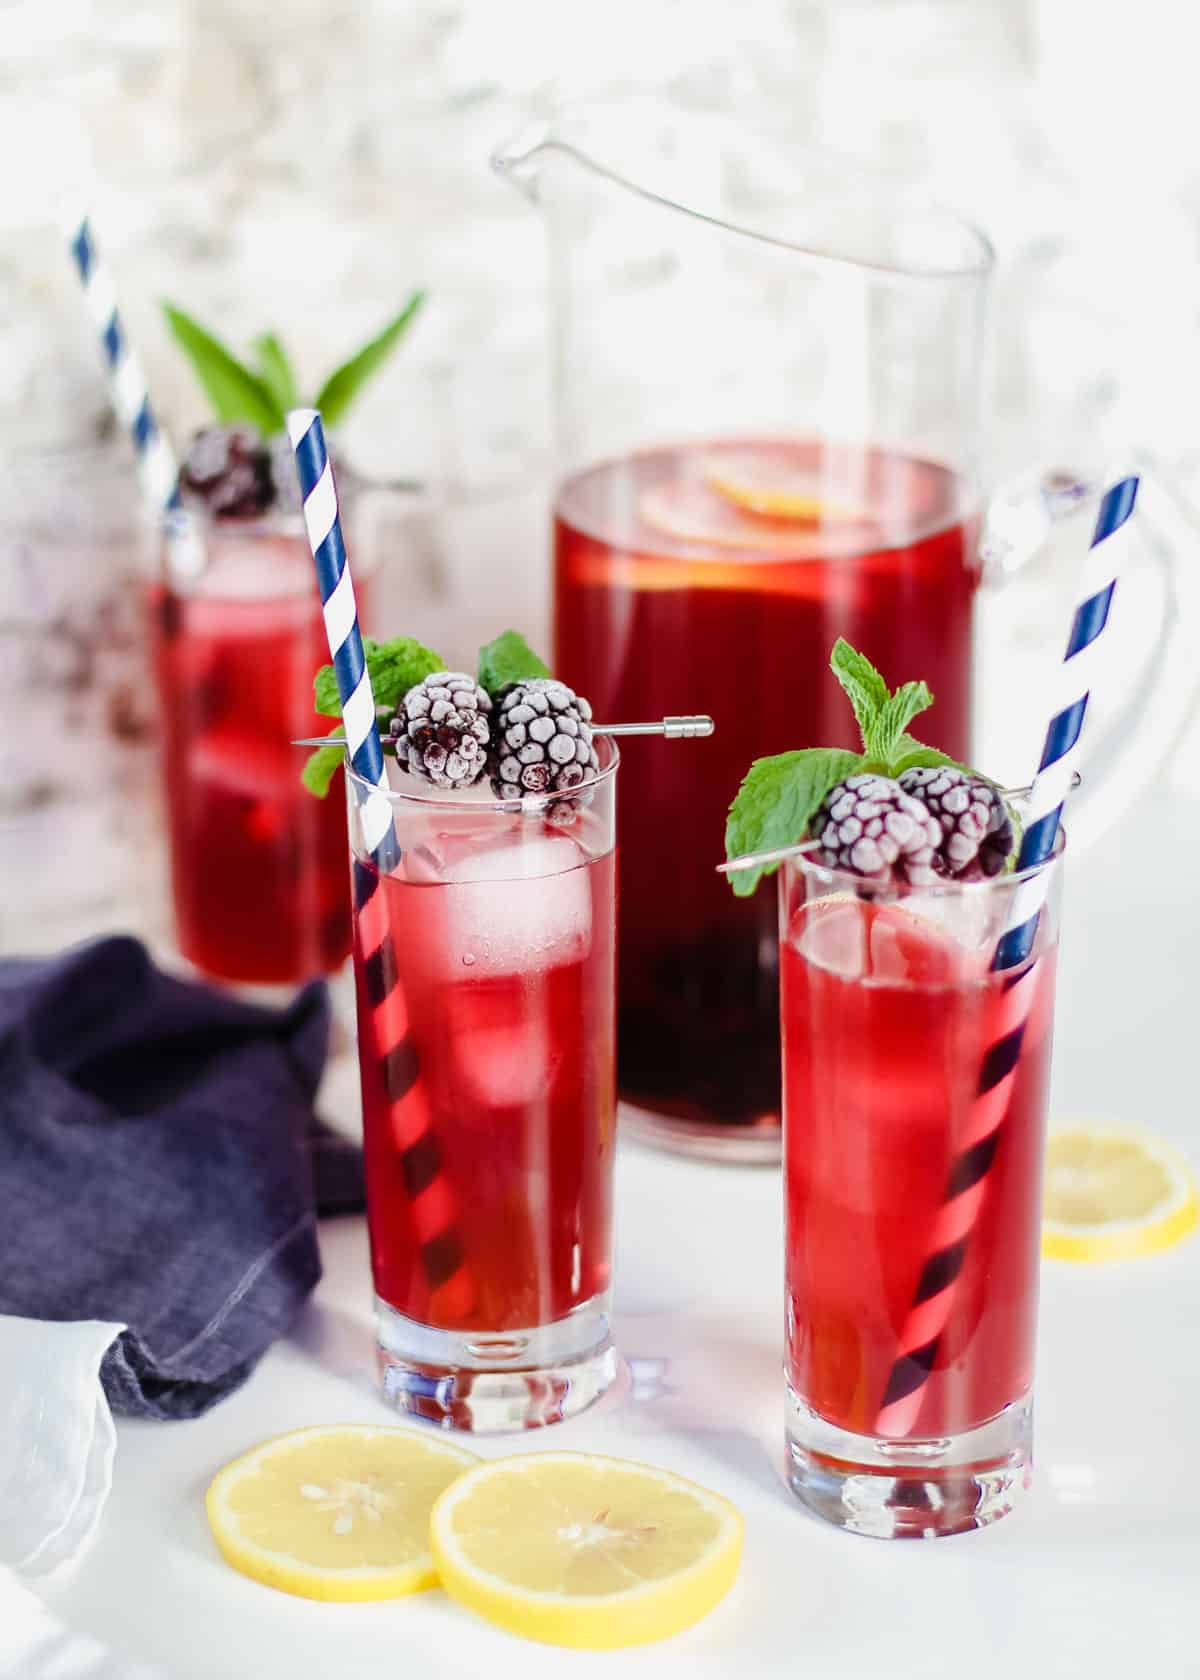 three tall glasses filled with  red drink on ice garnished with blackberries and mint, with pitcher in background.